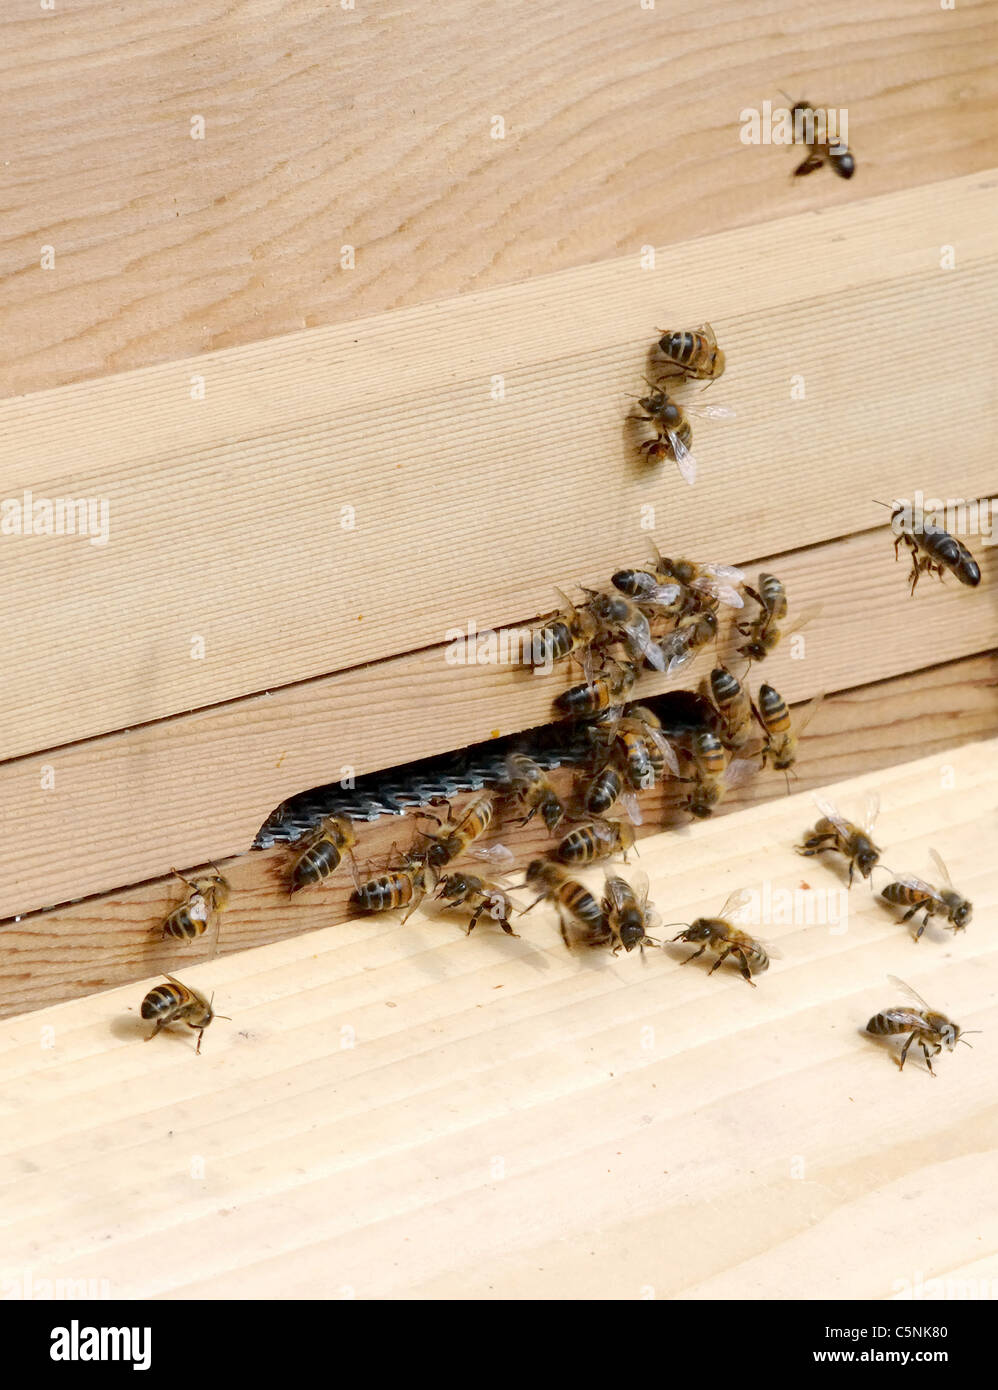 Bees clustered around hive entrance after an inspection Stock Photo